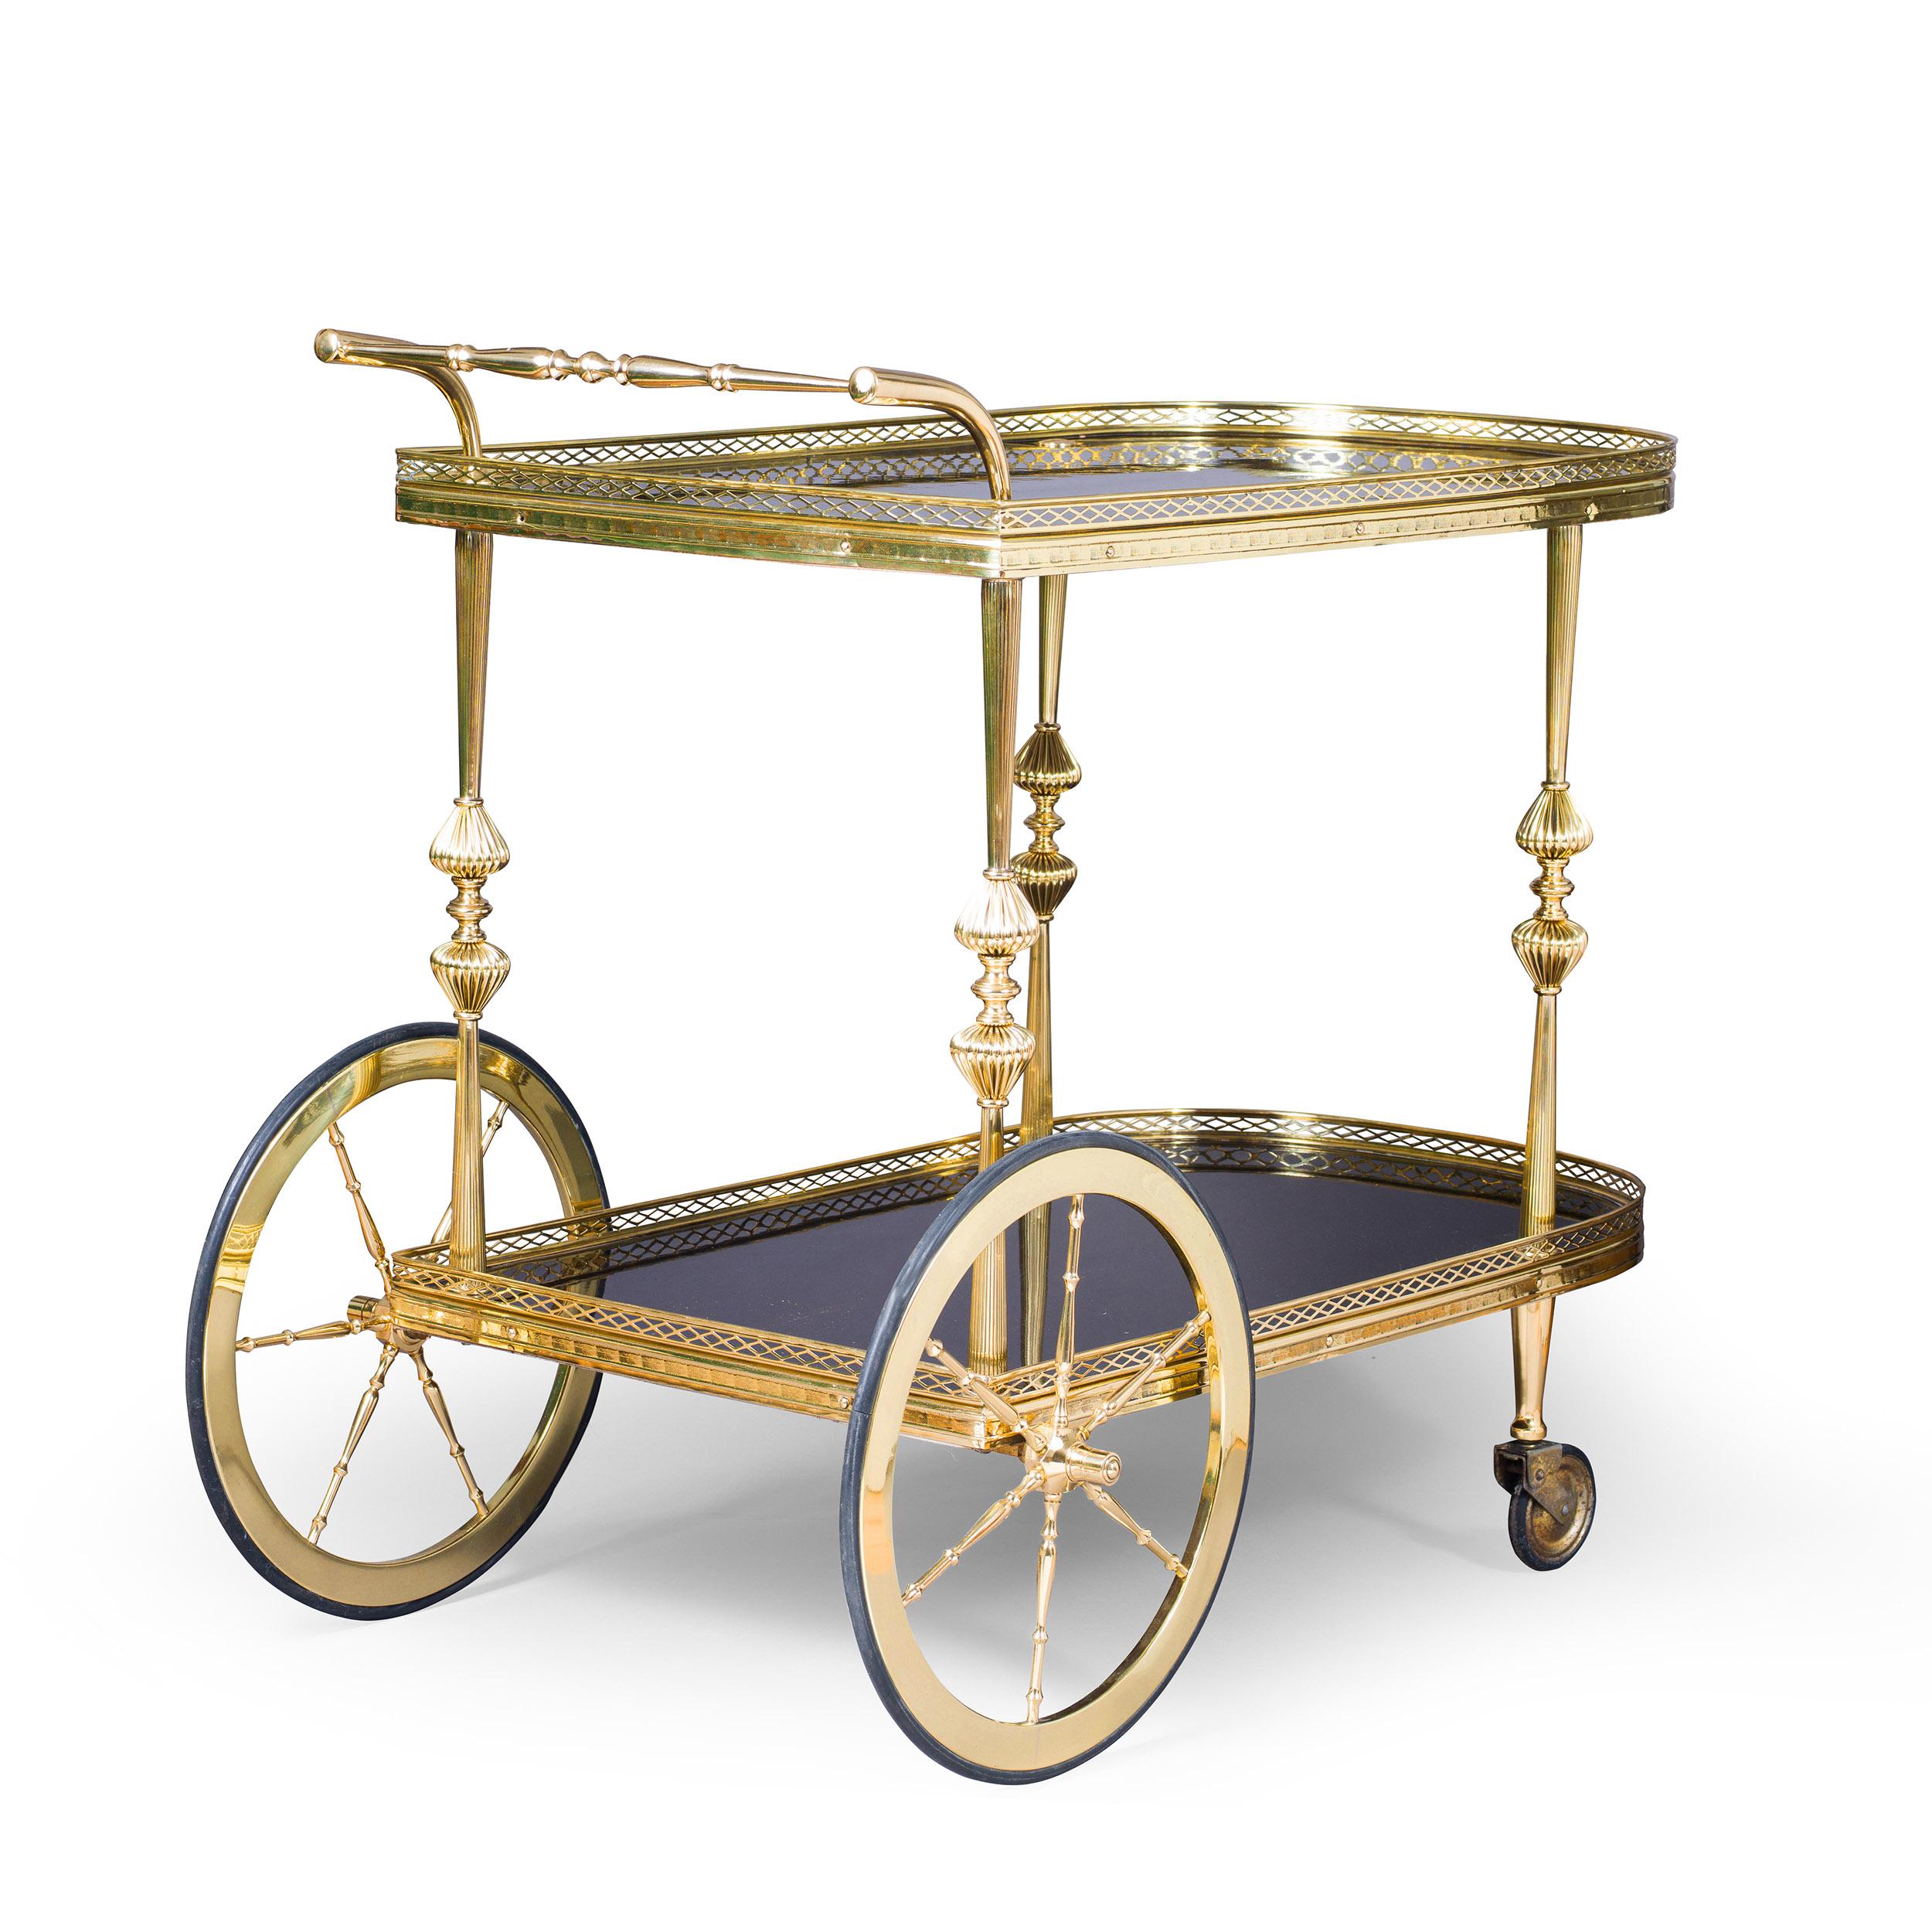 A fine mid-century drinks trolley or bar cart, the two tiers with black polished tops within polished brass pierced galleries, the top supported on fluted brass legs with cast details. With large polished wheels below the handle and smaller trolley